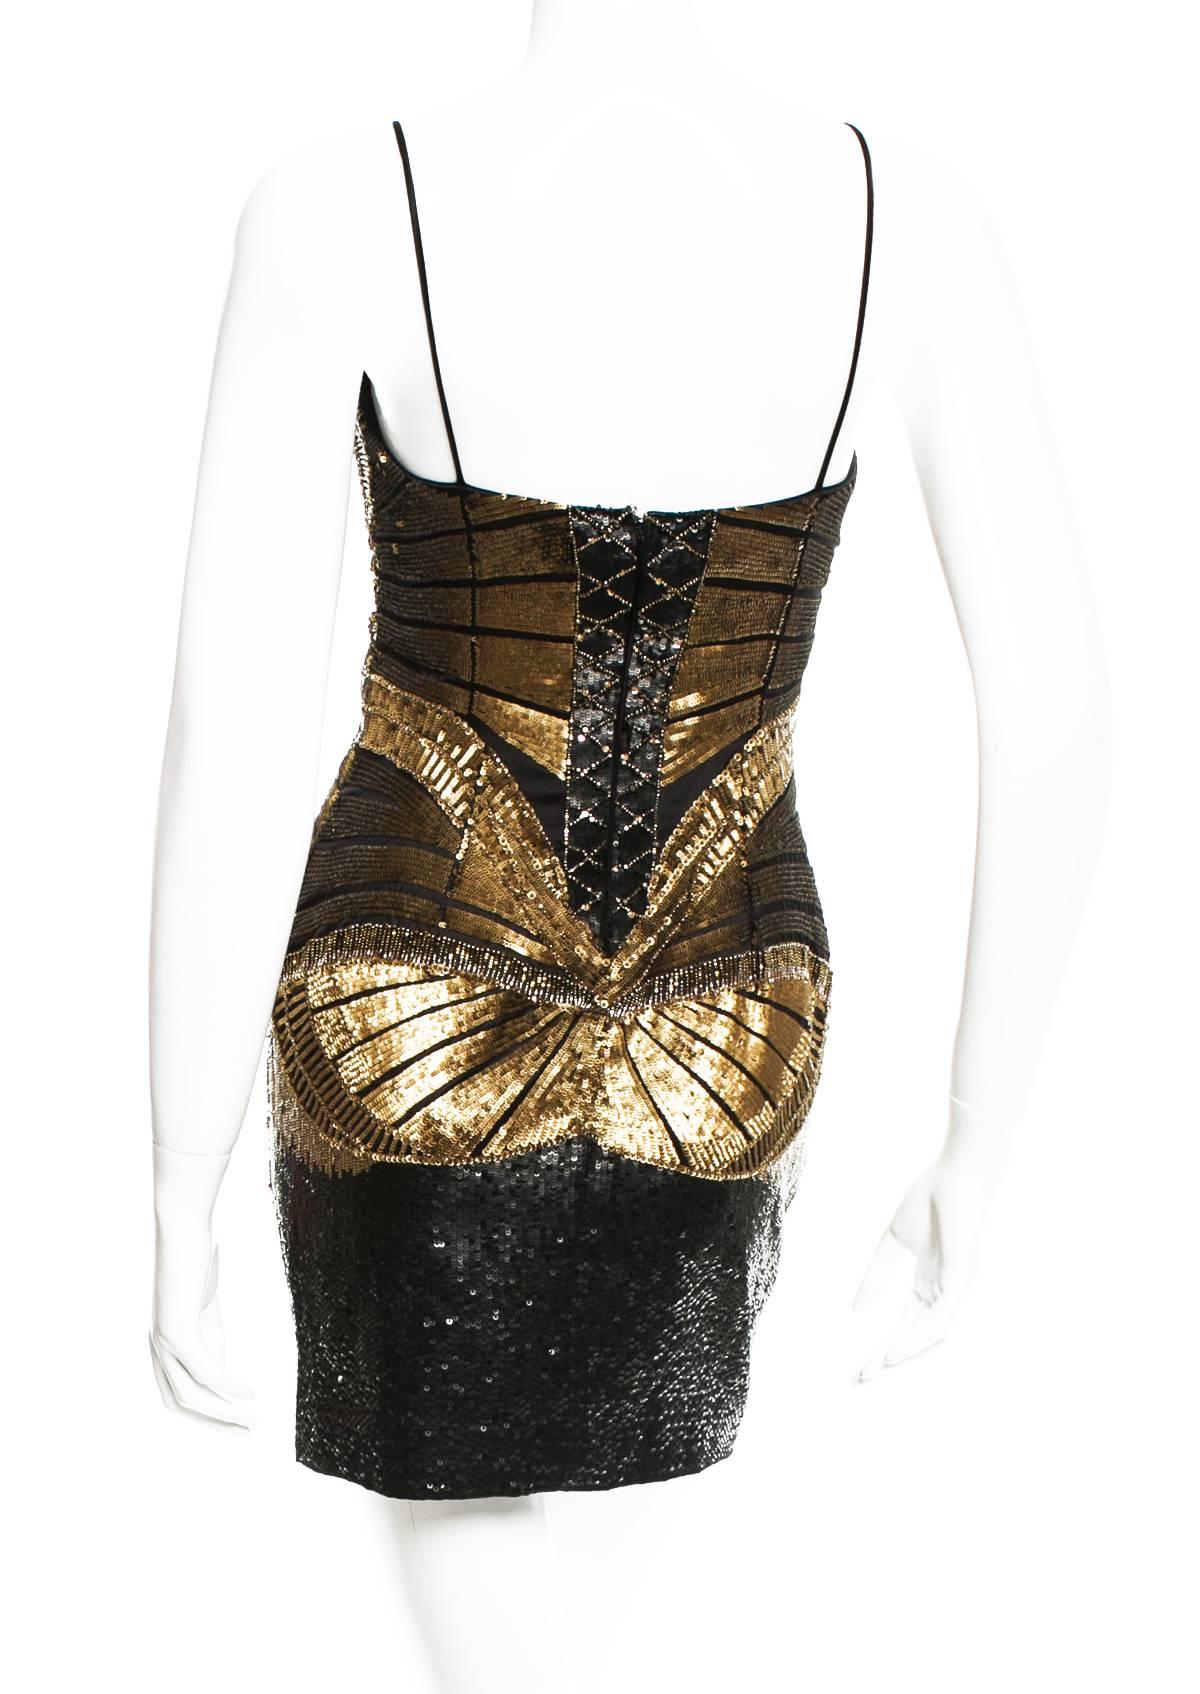 New ROBERTO CAVALLI Fully Embellished Mini Dress
Italian Size 40 - US 4
Fully Embellished with Gold-Tone, Black Beads and Sequins
100% Silk, Corset Insert
Fully Lined, Back Zip Closure
Measurements: Length - 31 inch, Waist - 26 inches, Hip - 34